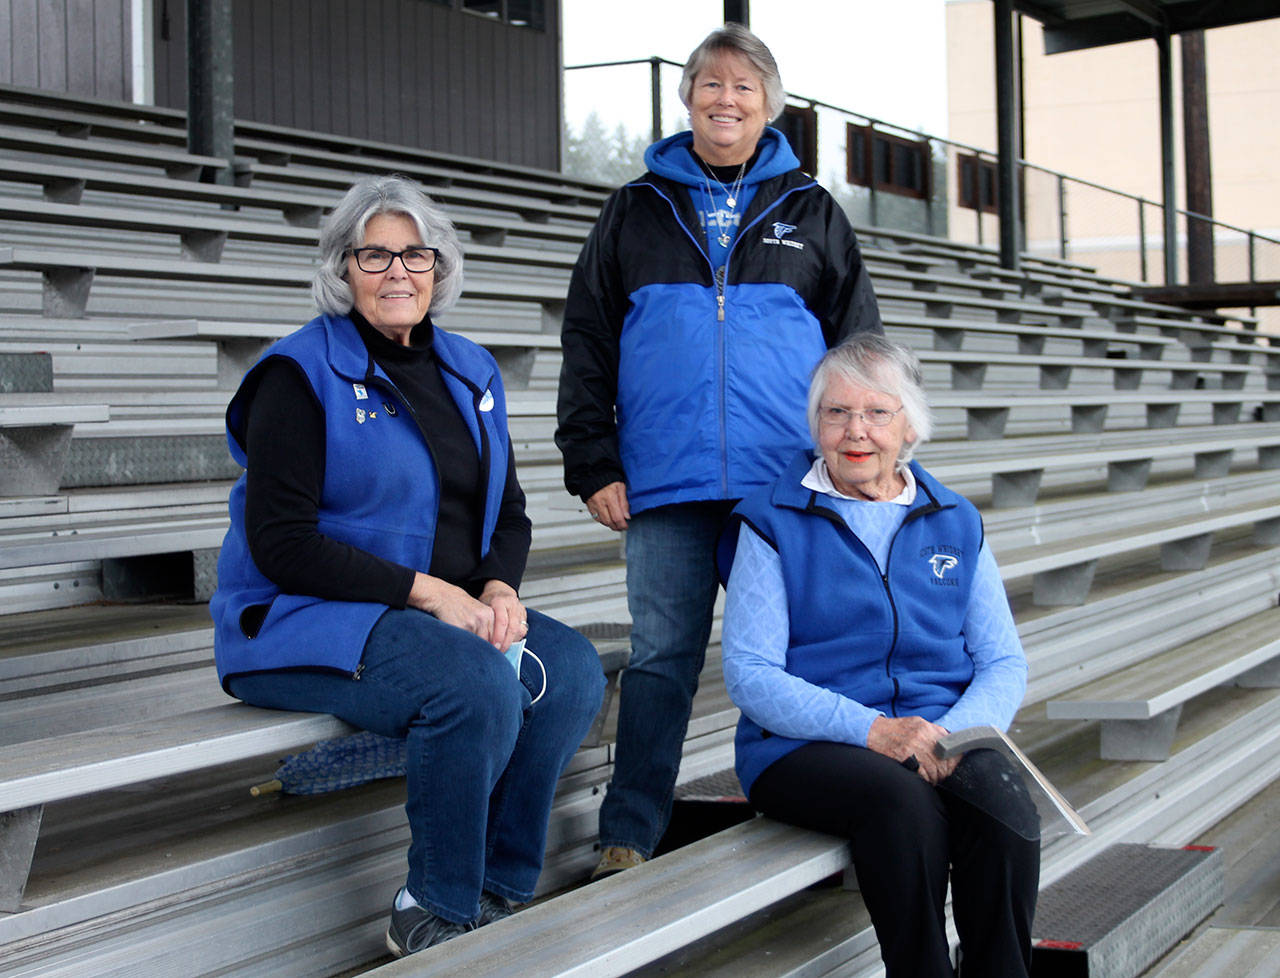 For decades, Pat Nostrand, left, Janet McNeely and Mary Ann Davis have helped behind the scenes at South Whidbey High School sporting events. (Photo by Jim Waller/Whidbey News Group)